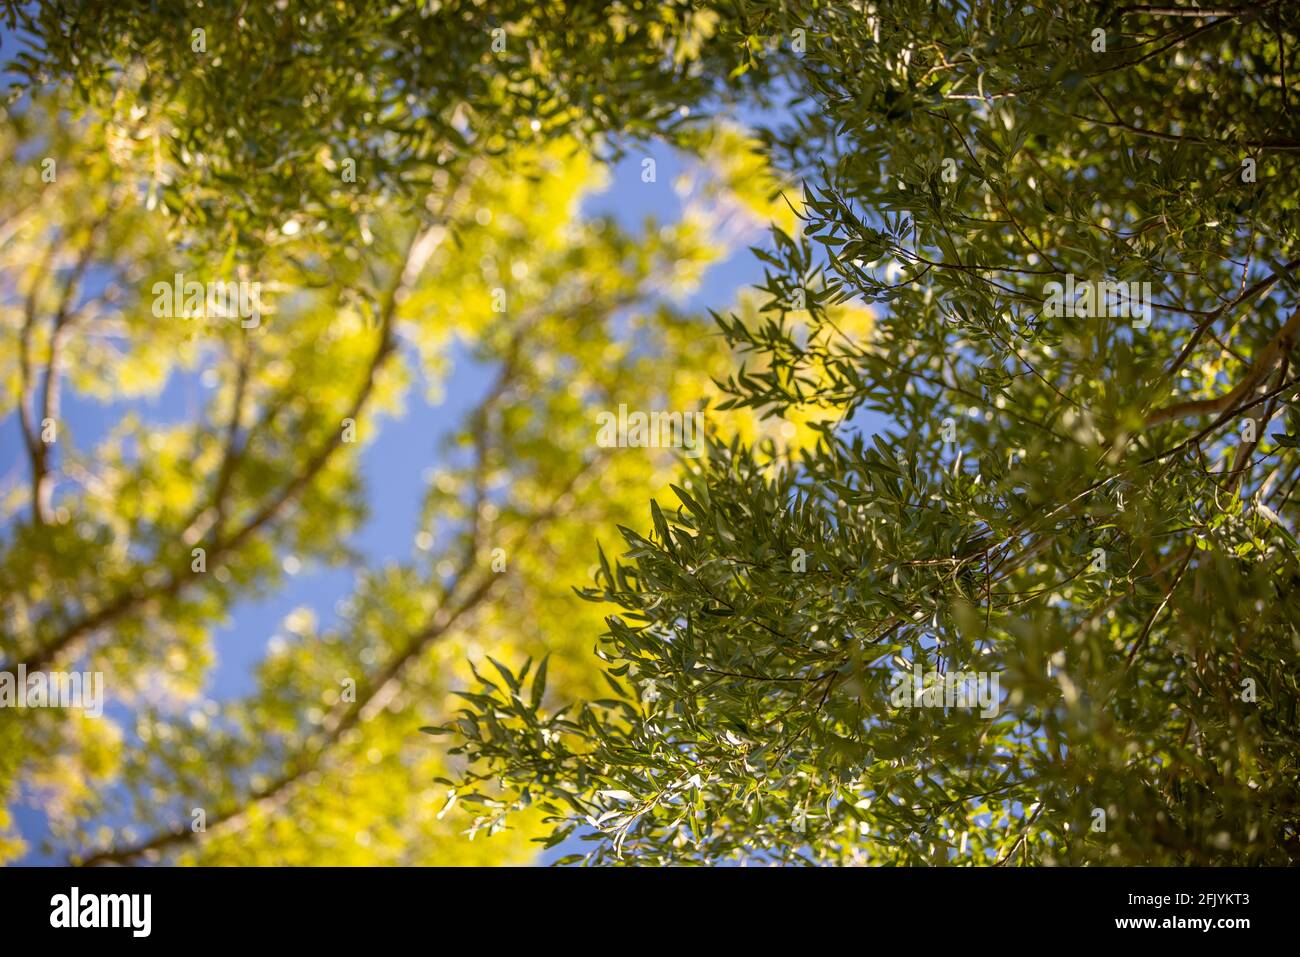 Looking Up at Lush Foliage with Blue Sky Stock Photo